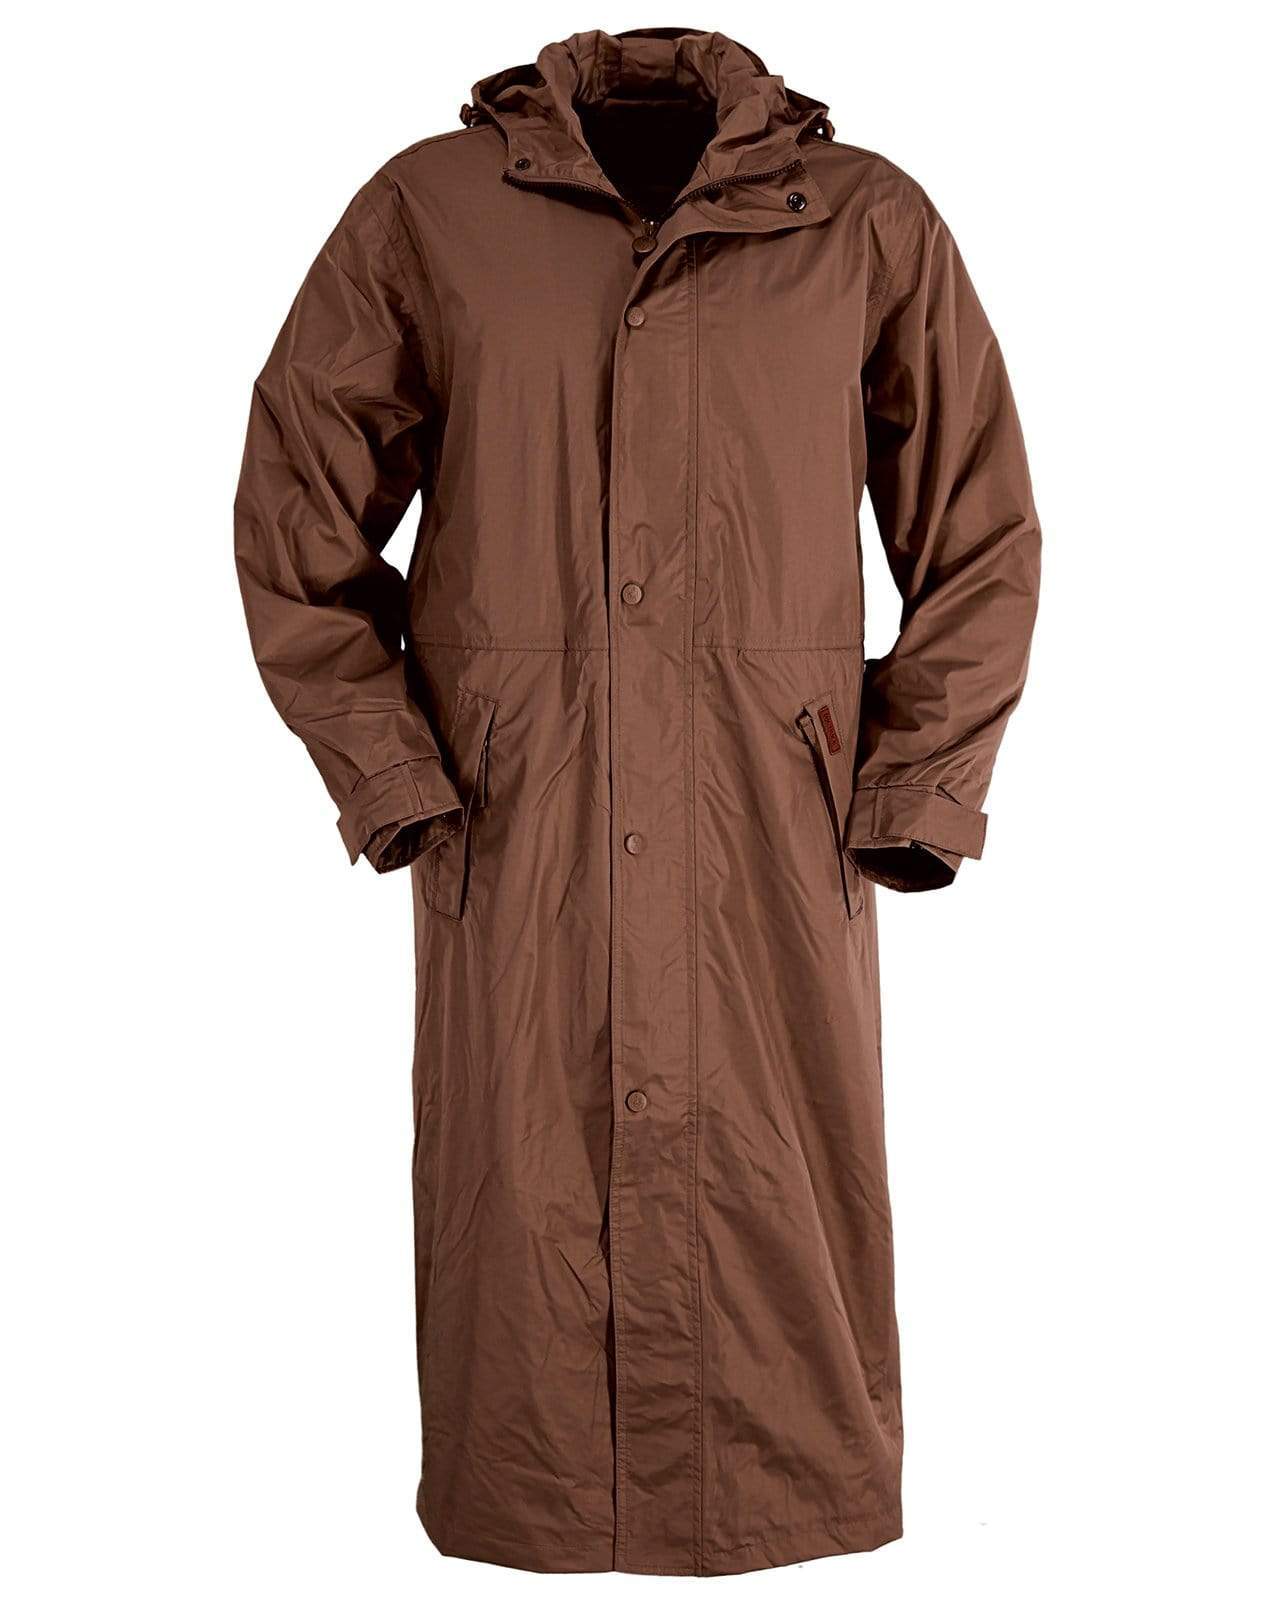 Outback Trading Company Pak-A-Roo Duster Brown / XXXL 2406-BRN-3XL 089043329170 Duster Coats